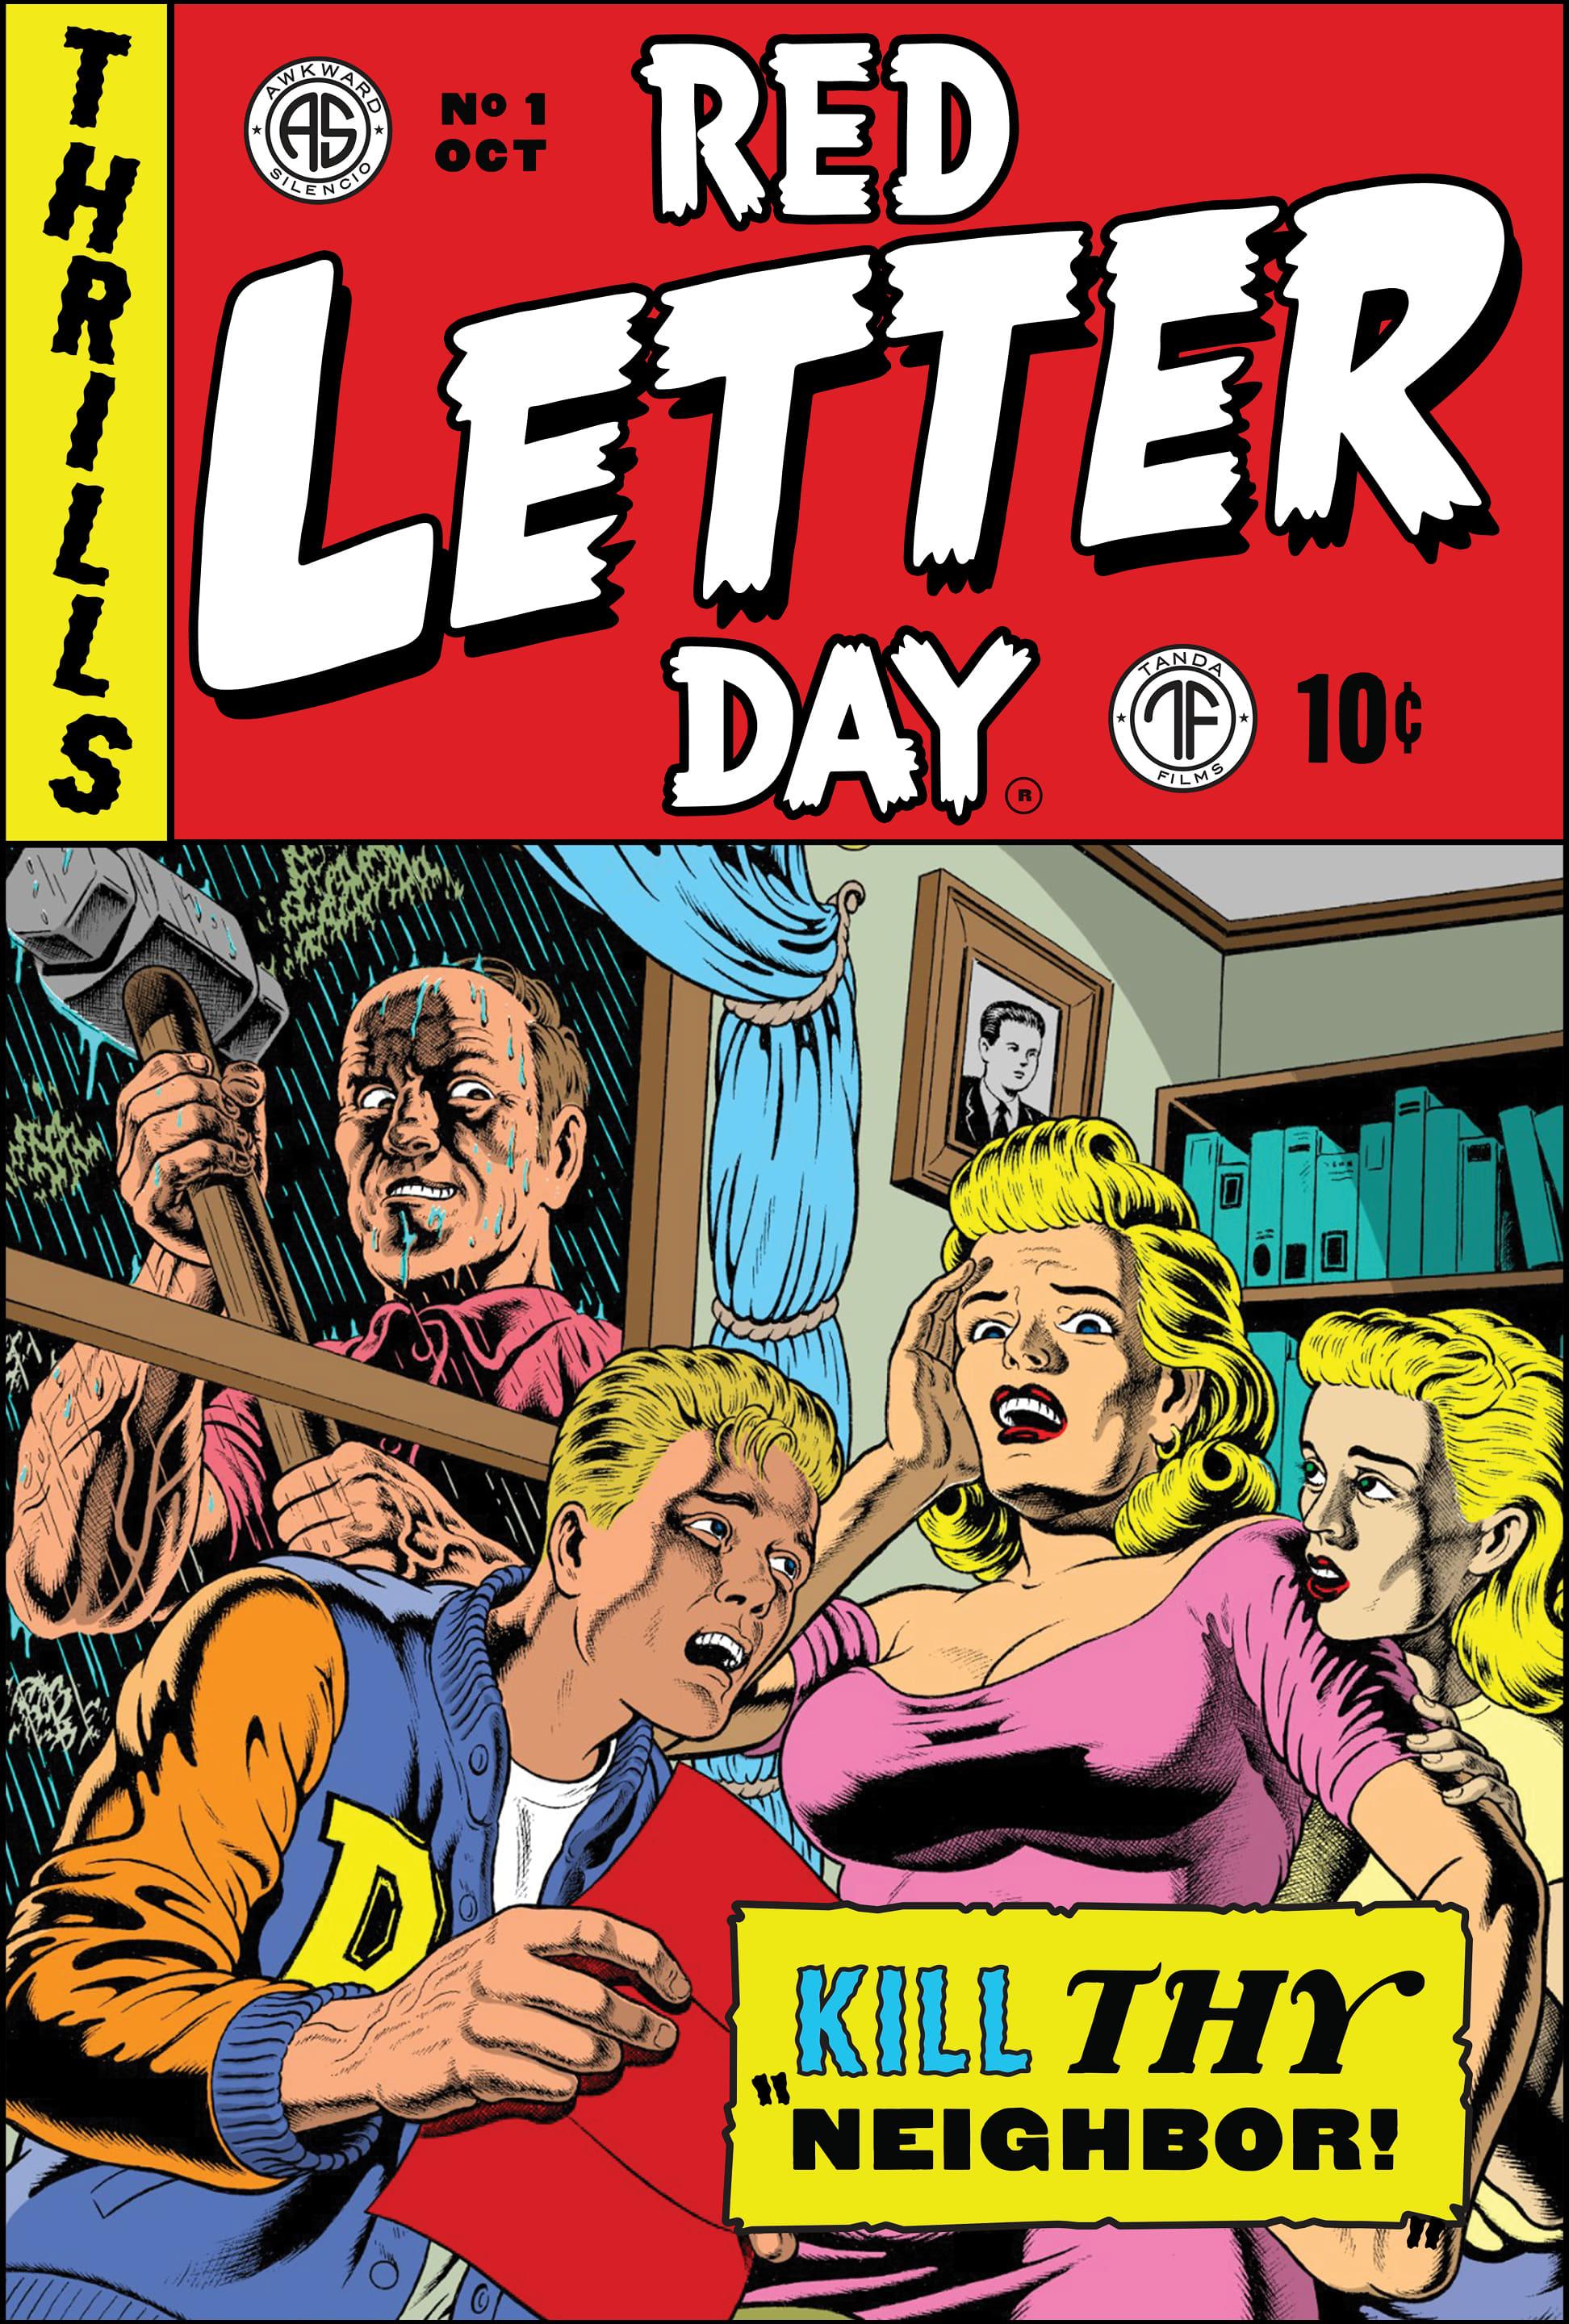 Red Letter Day poster